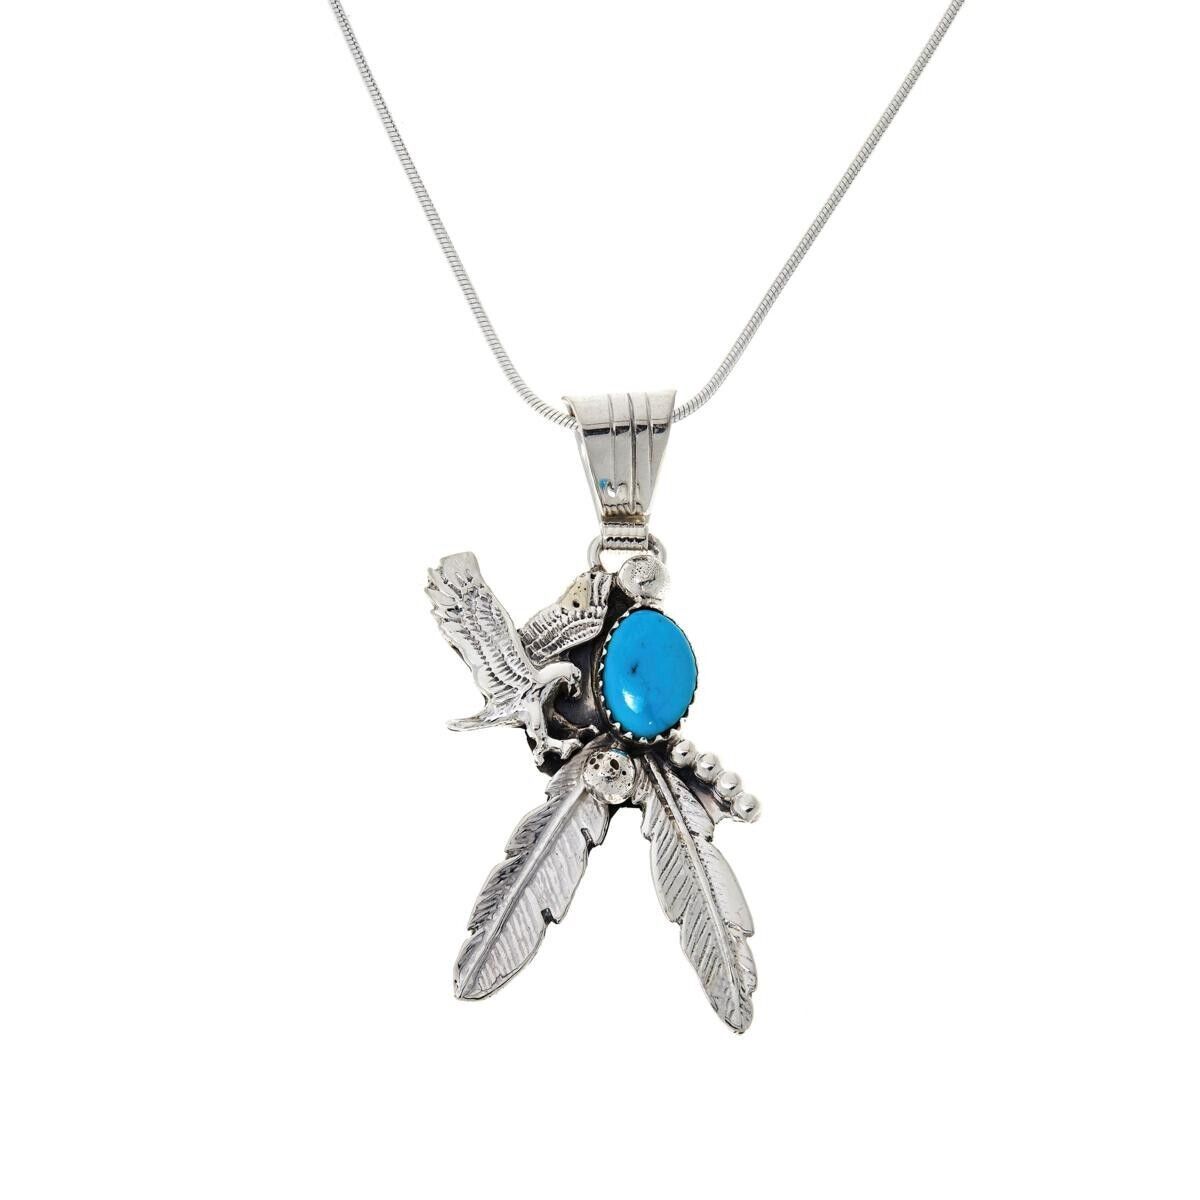 Chaco Canyon Sterling Silver Sleeping Beauty Turquoise Eagle Necklace. 20"